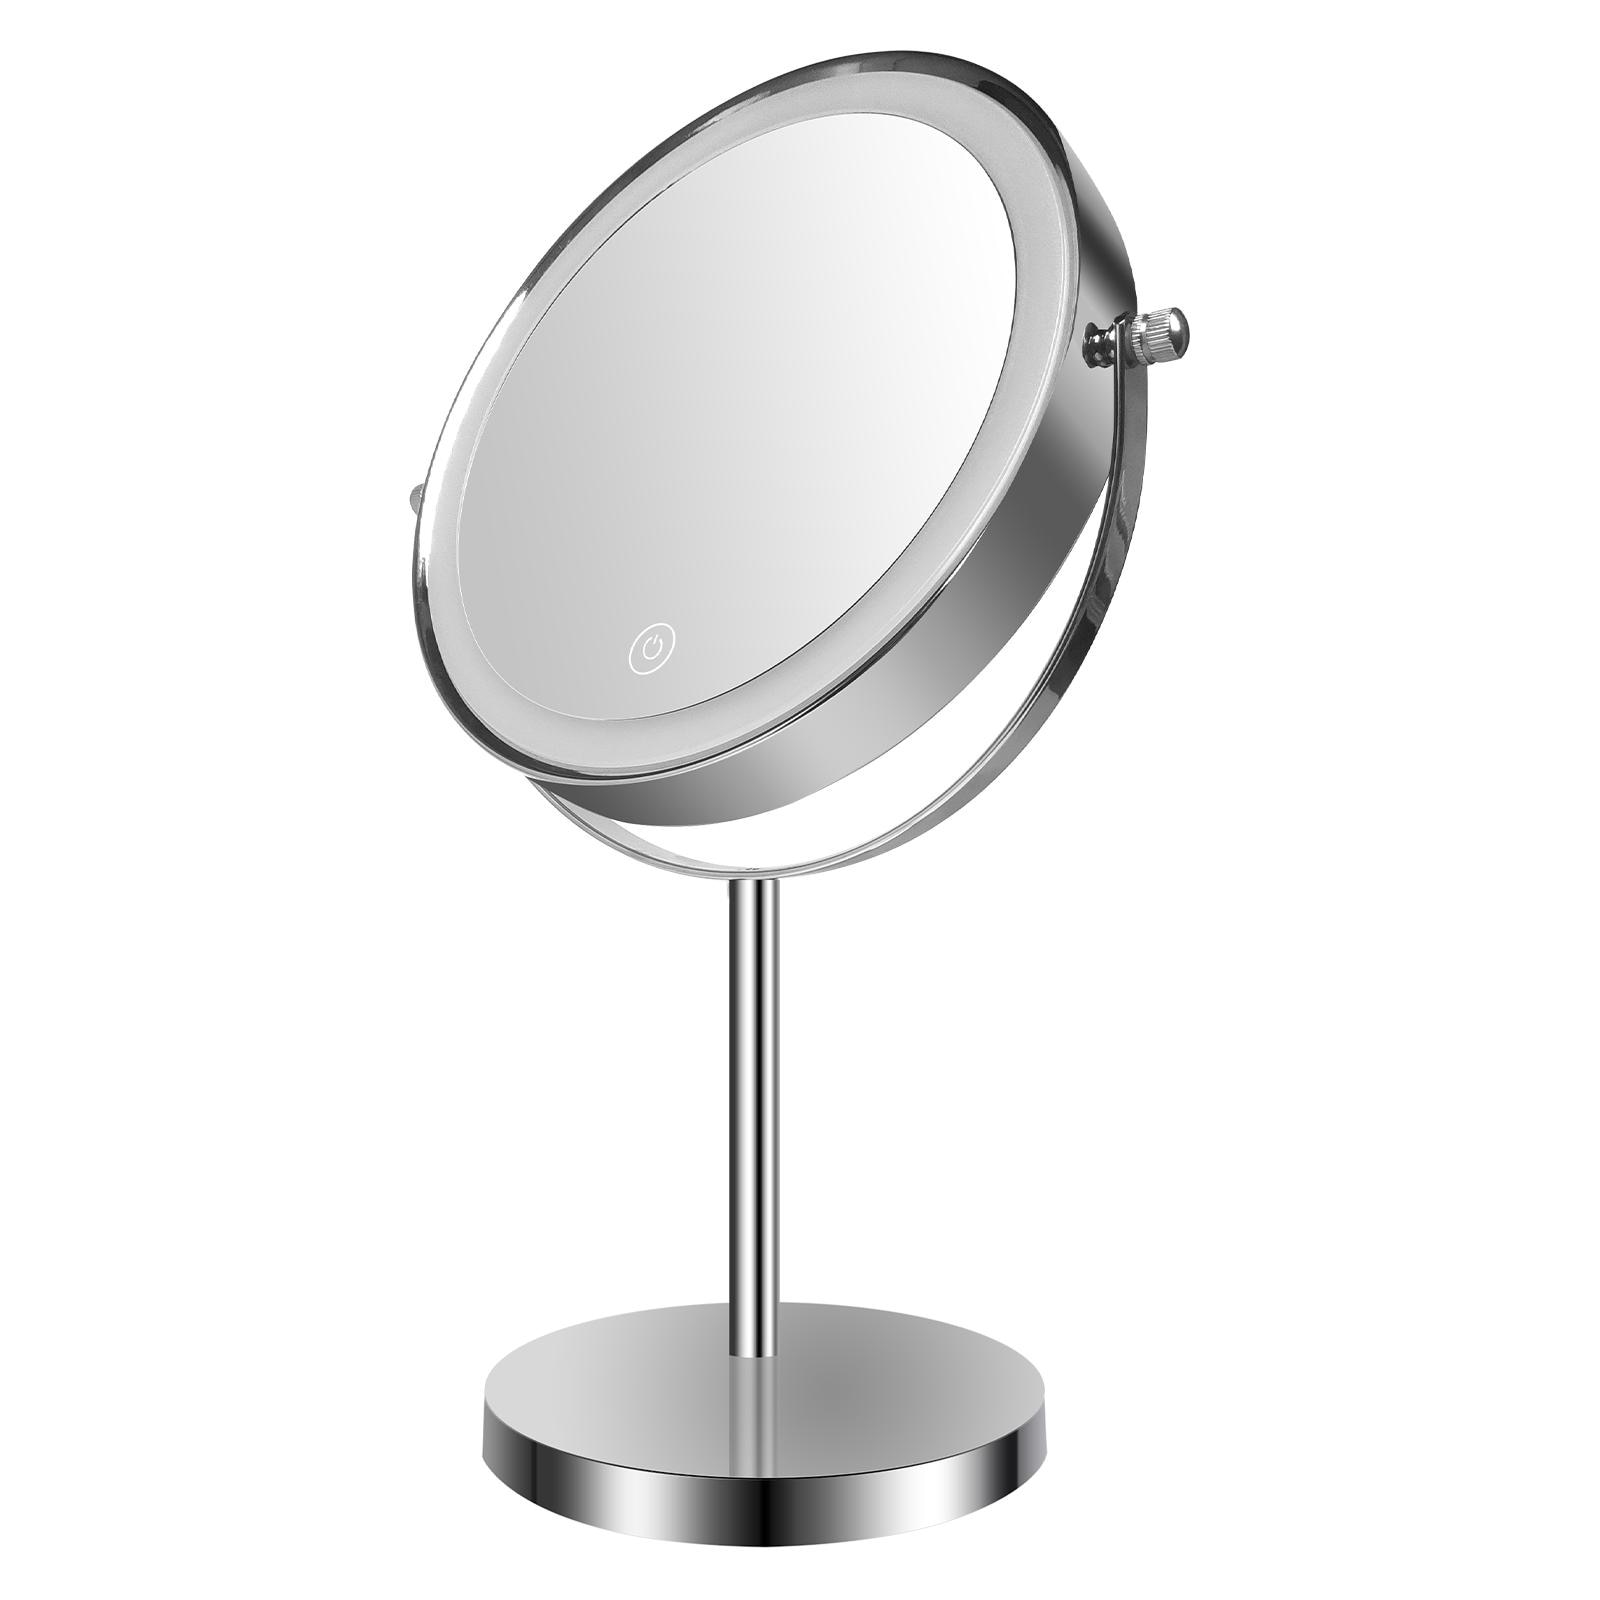 15X Maginifying Spot Small Round Mirror - gray - 4.5 in. x 1 in. x 4.5 in.  - Bed Bath & Beyond - 15031450